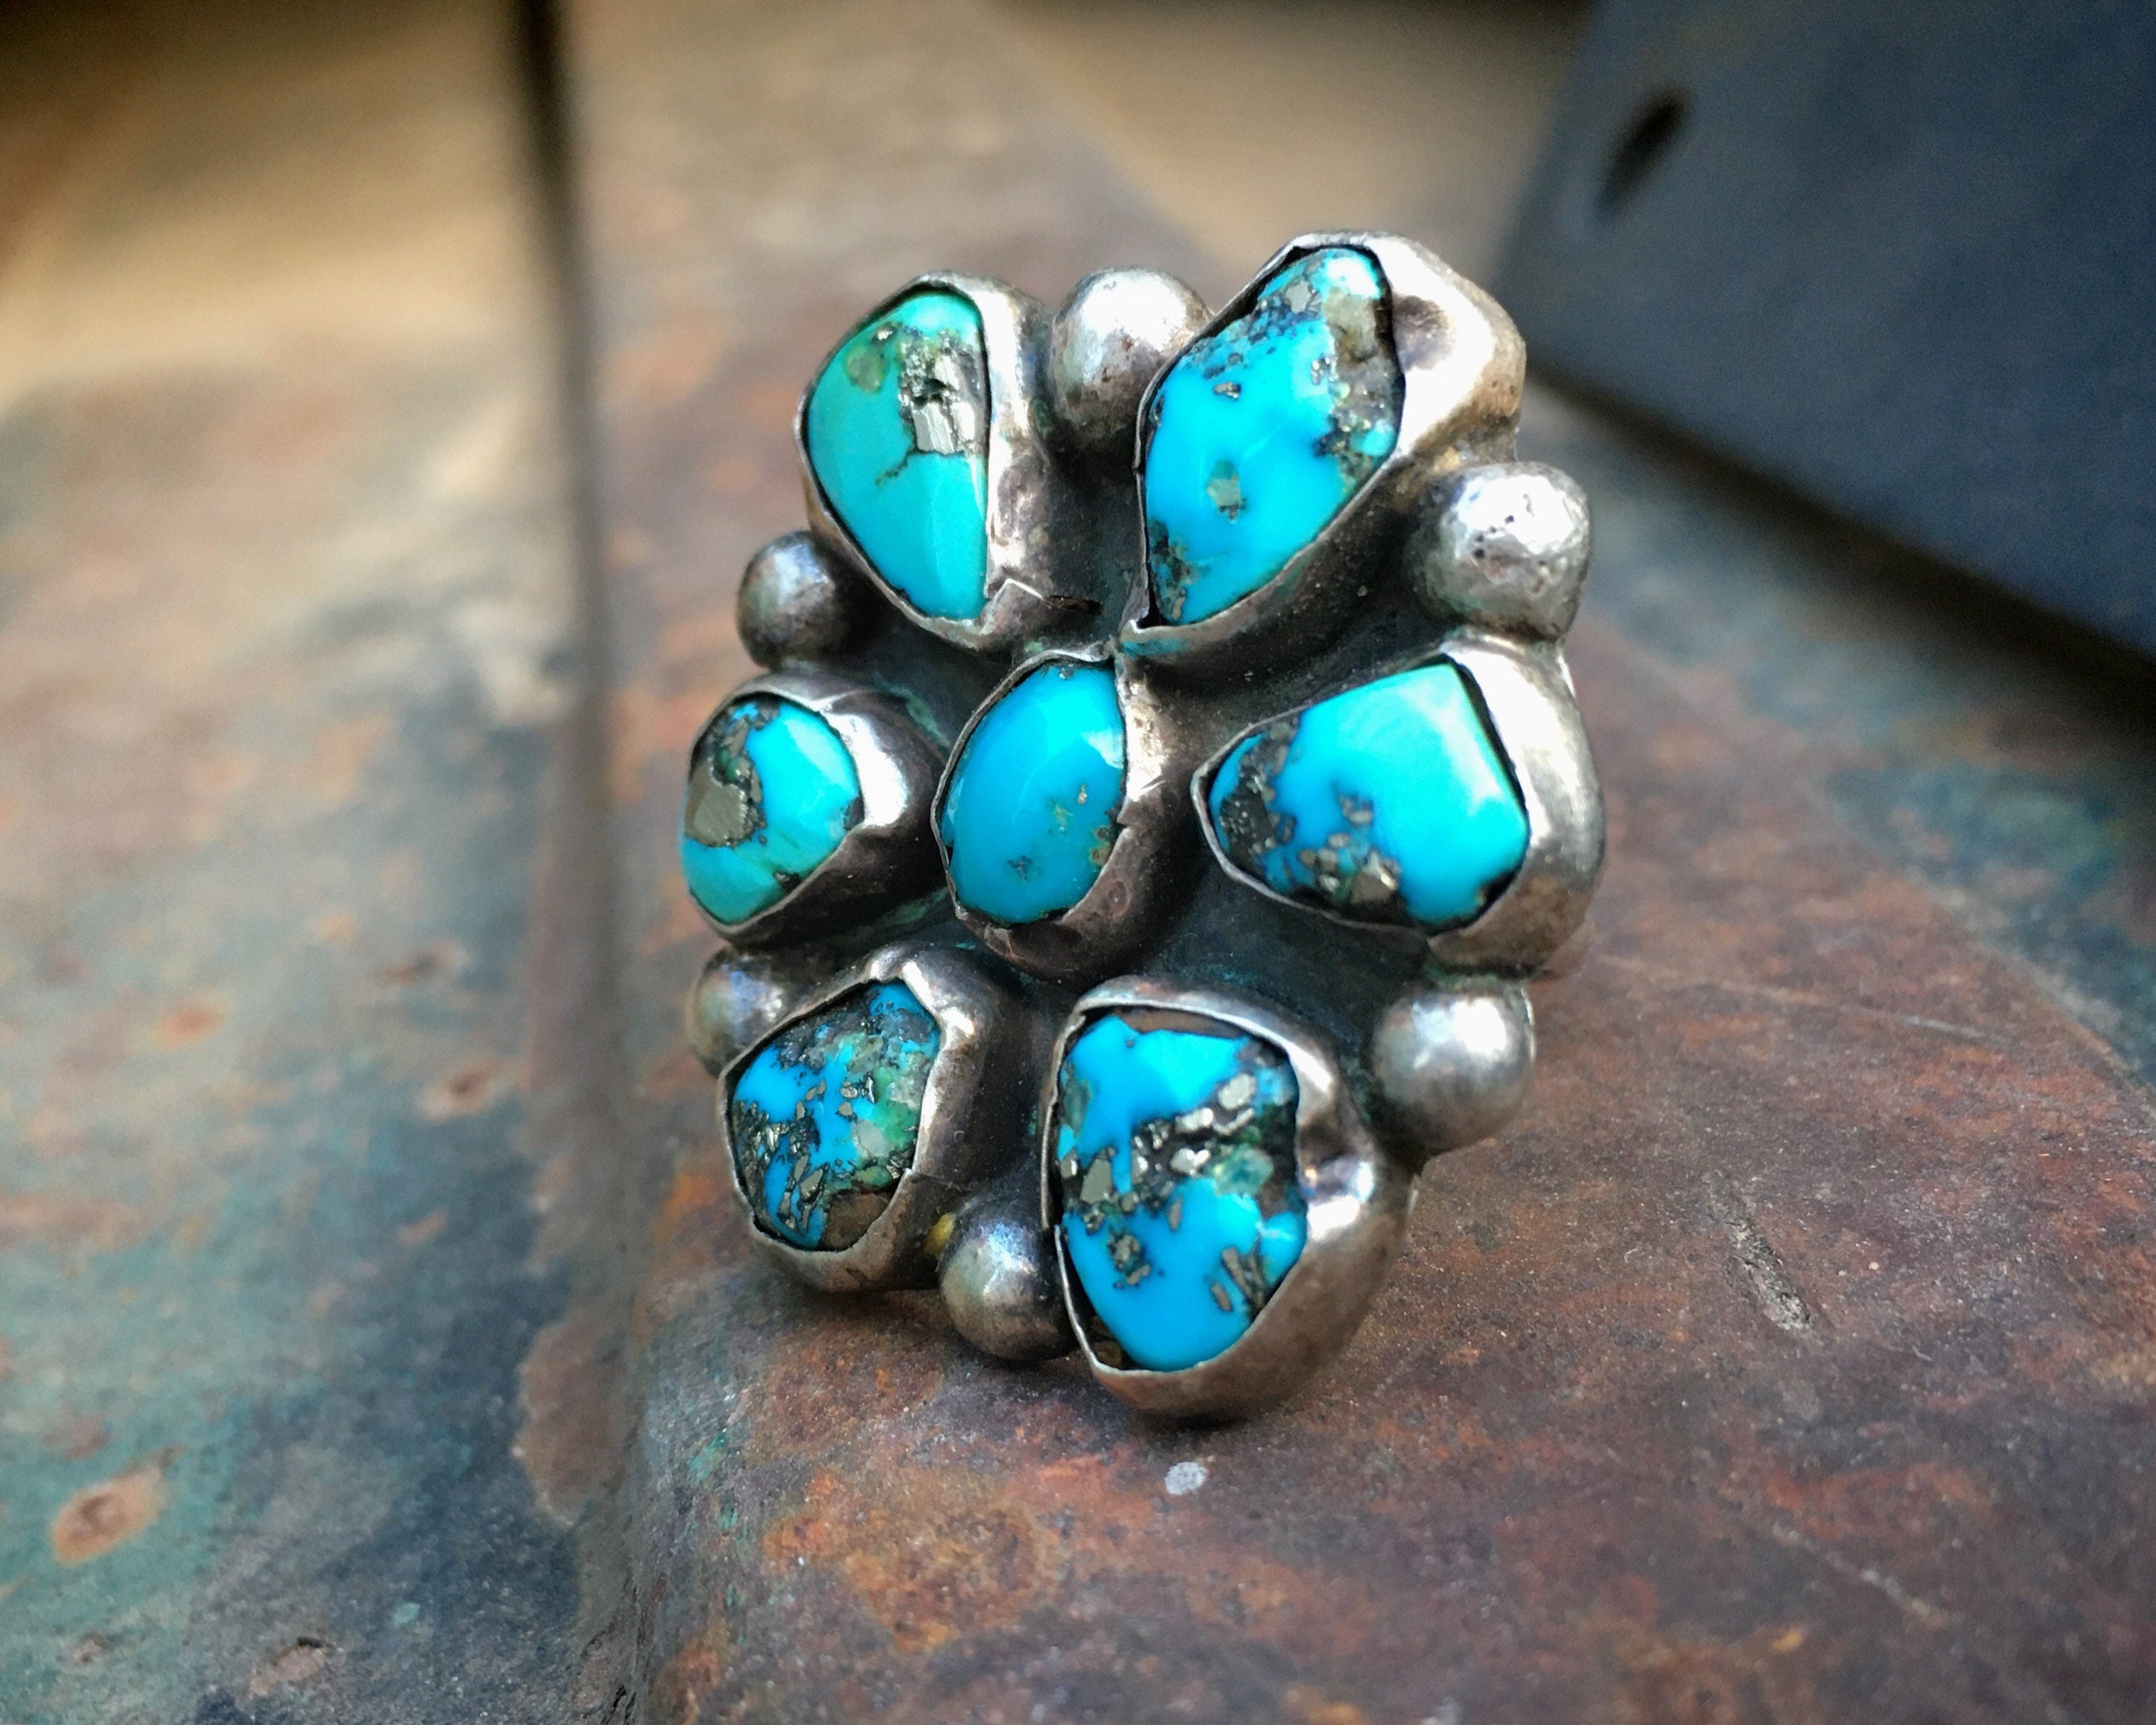 14g Rustic Old Navajo Ring with Pyrite Morenci Turquoise Size 8.5 ...